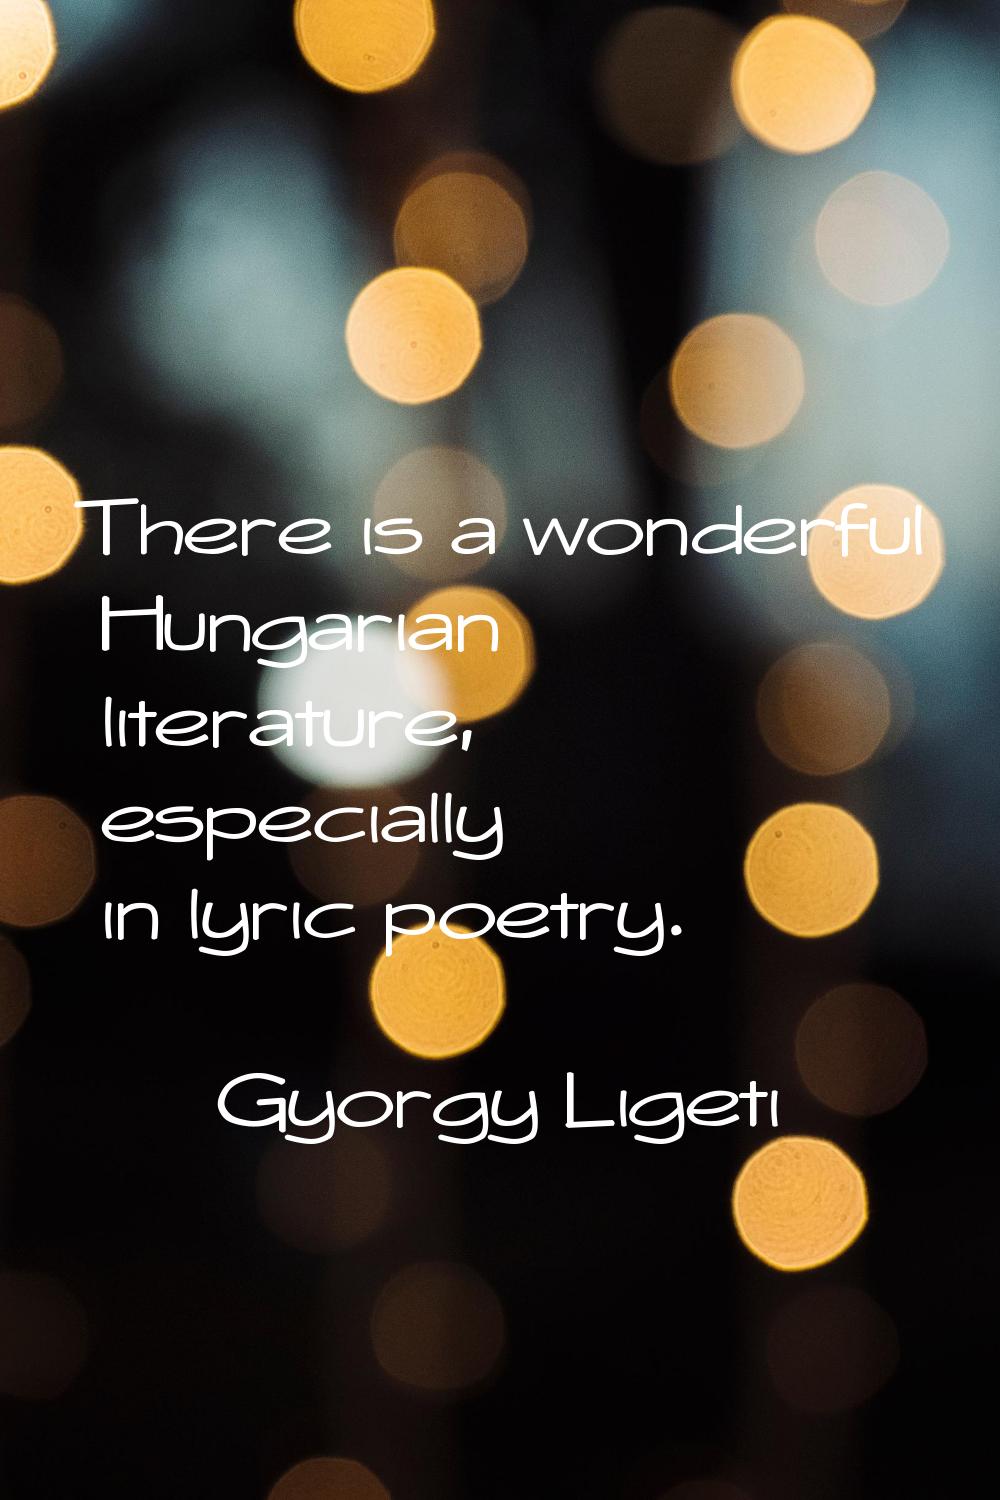 There is a wonderful Hungarian literature, especially in lyric poetry.